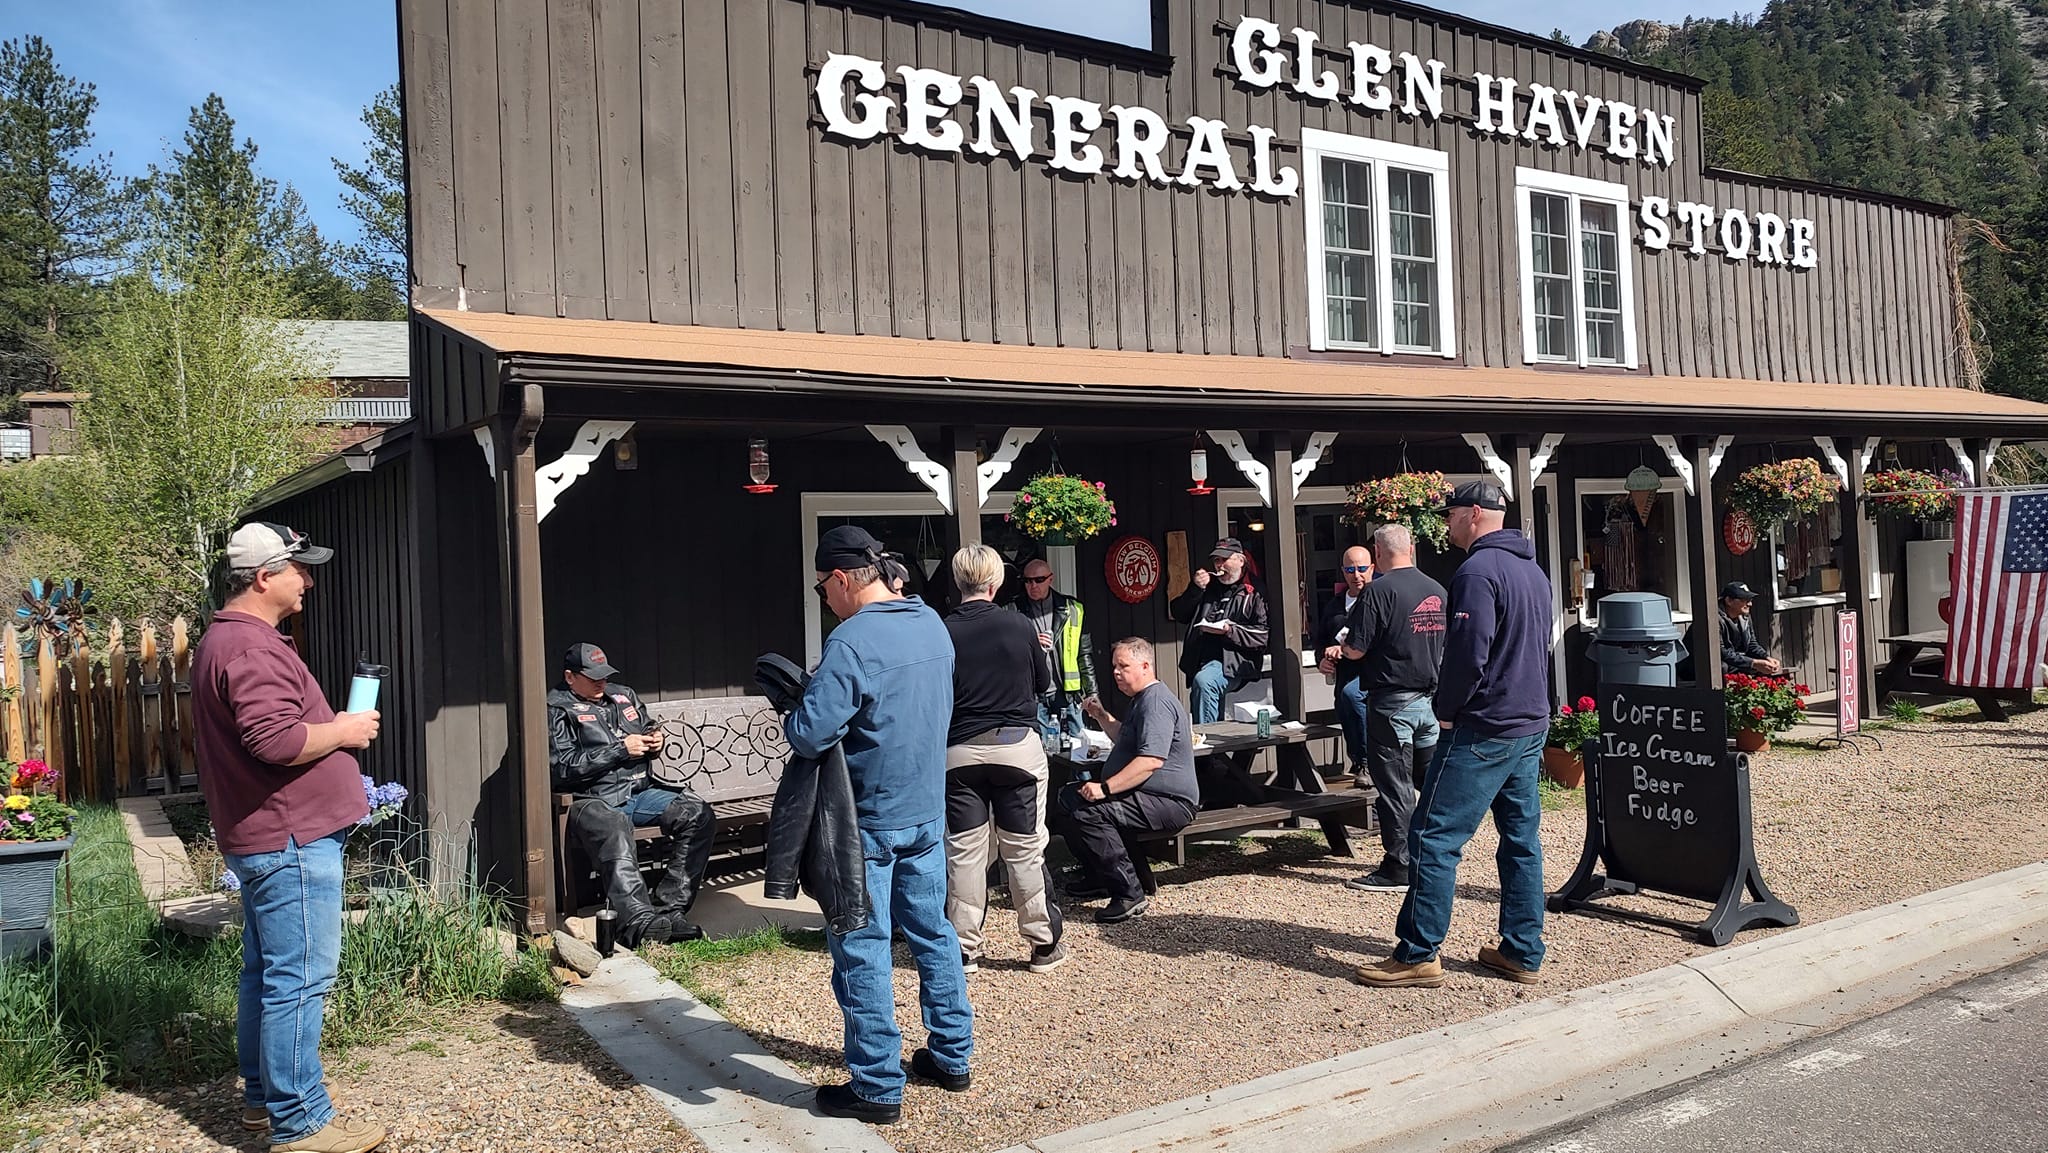 Northern Colorado Indian Motorcycle Riders Group at Glen Haven General Store